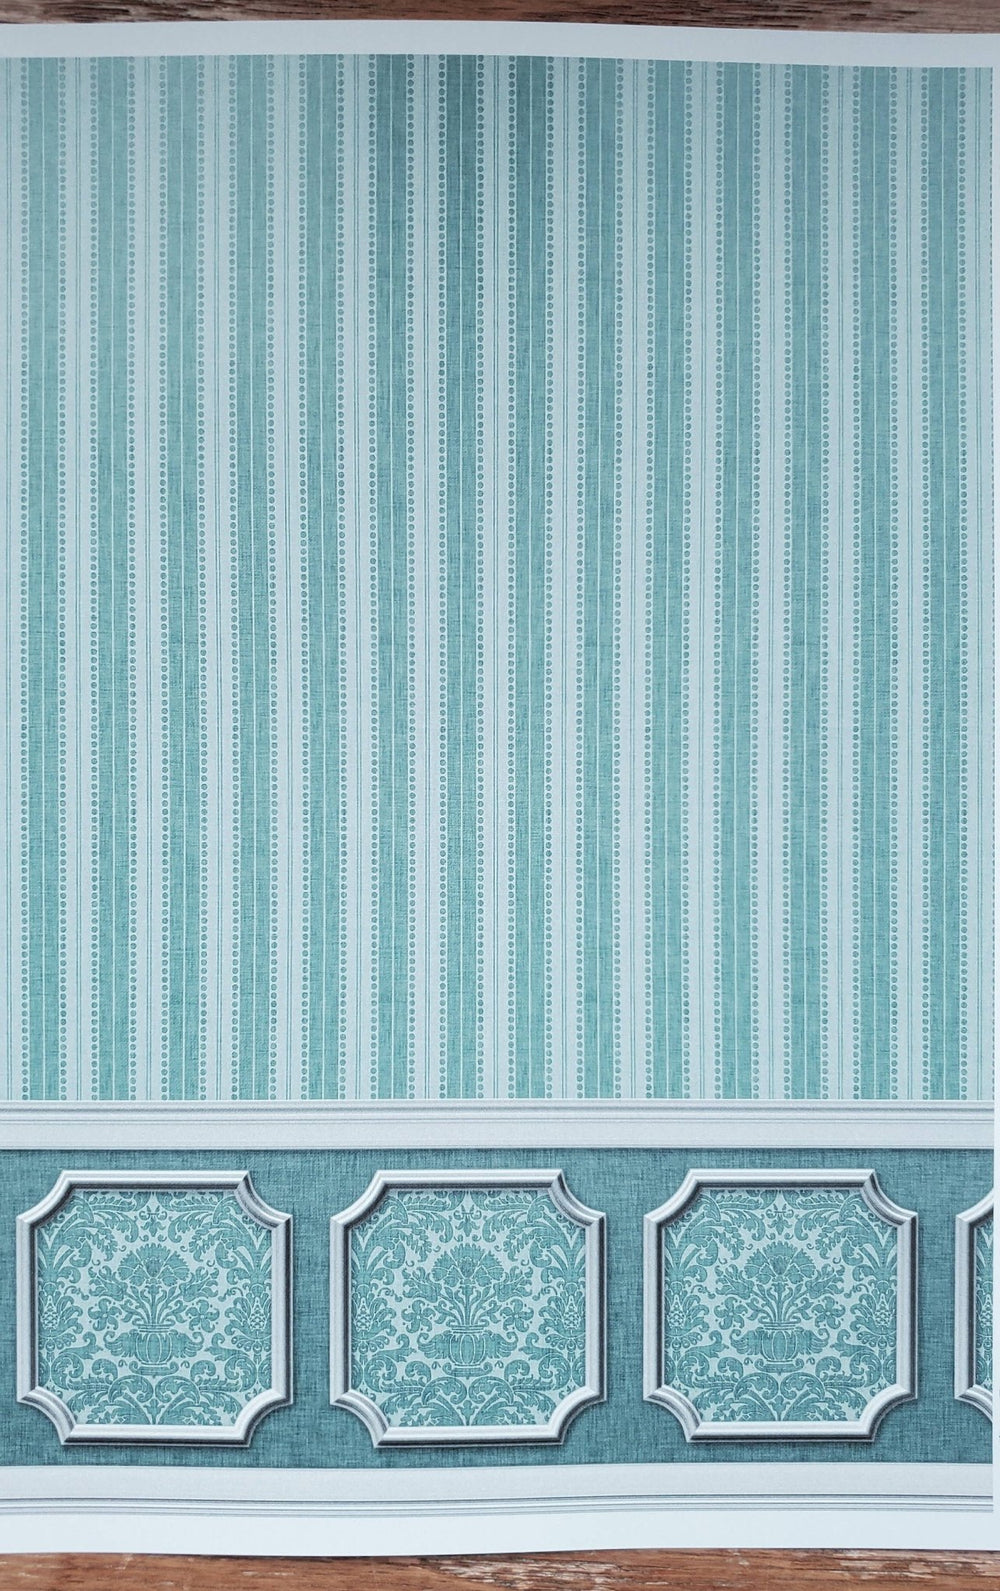 Dollhouse Wallpaper Blue Green Teal Striped Annabelle Wainscot 1:12 Scale Itsy Bitsy 2604 - Miniature Crush